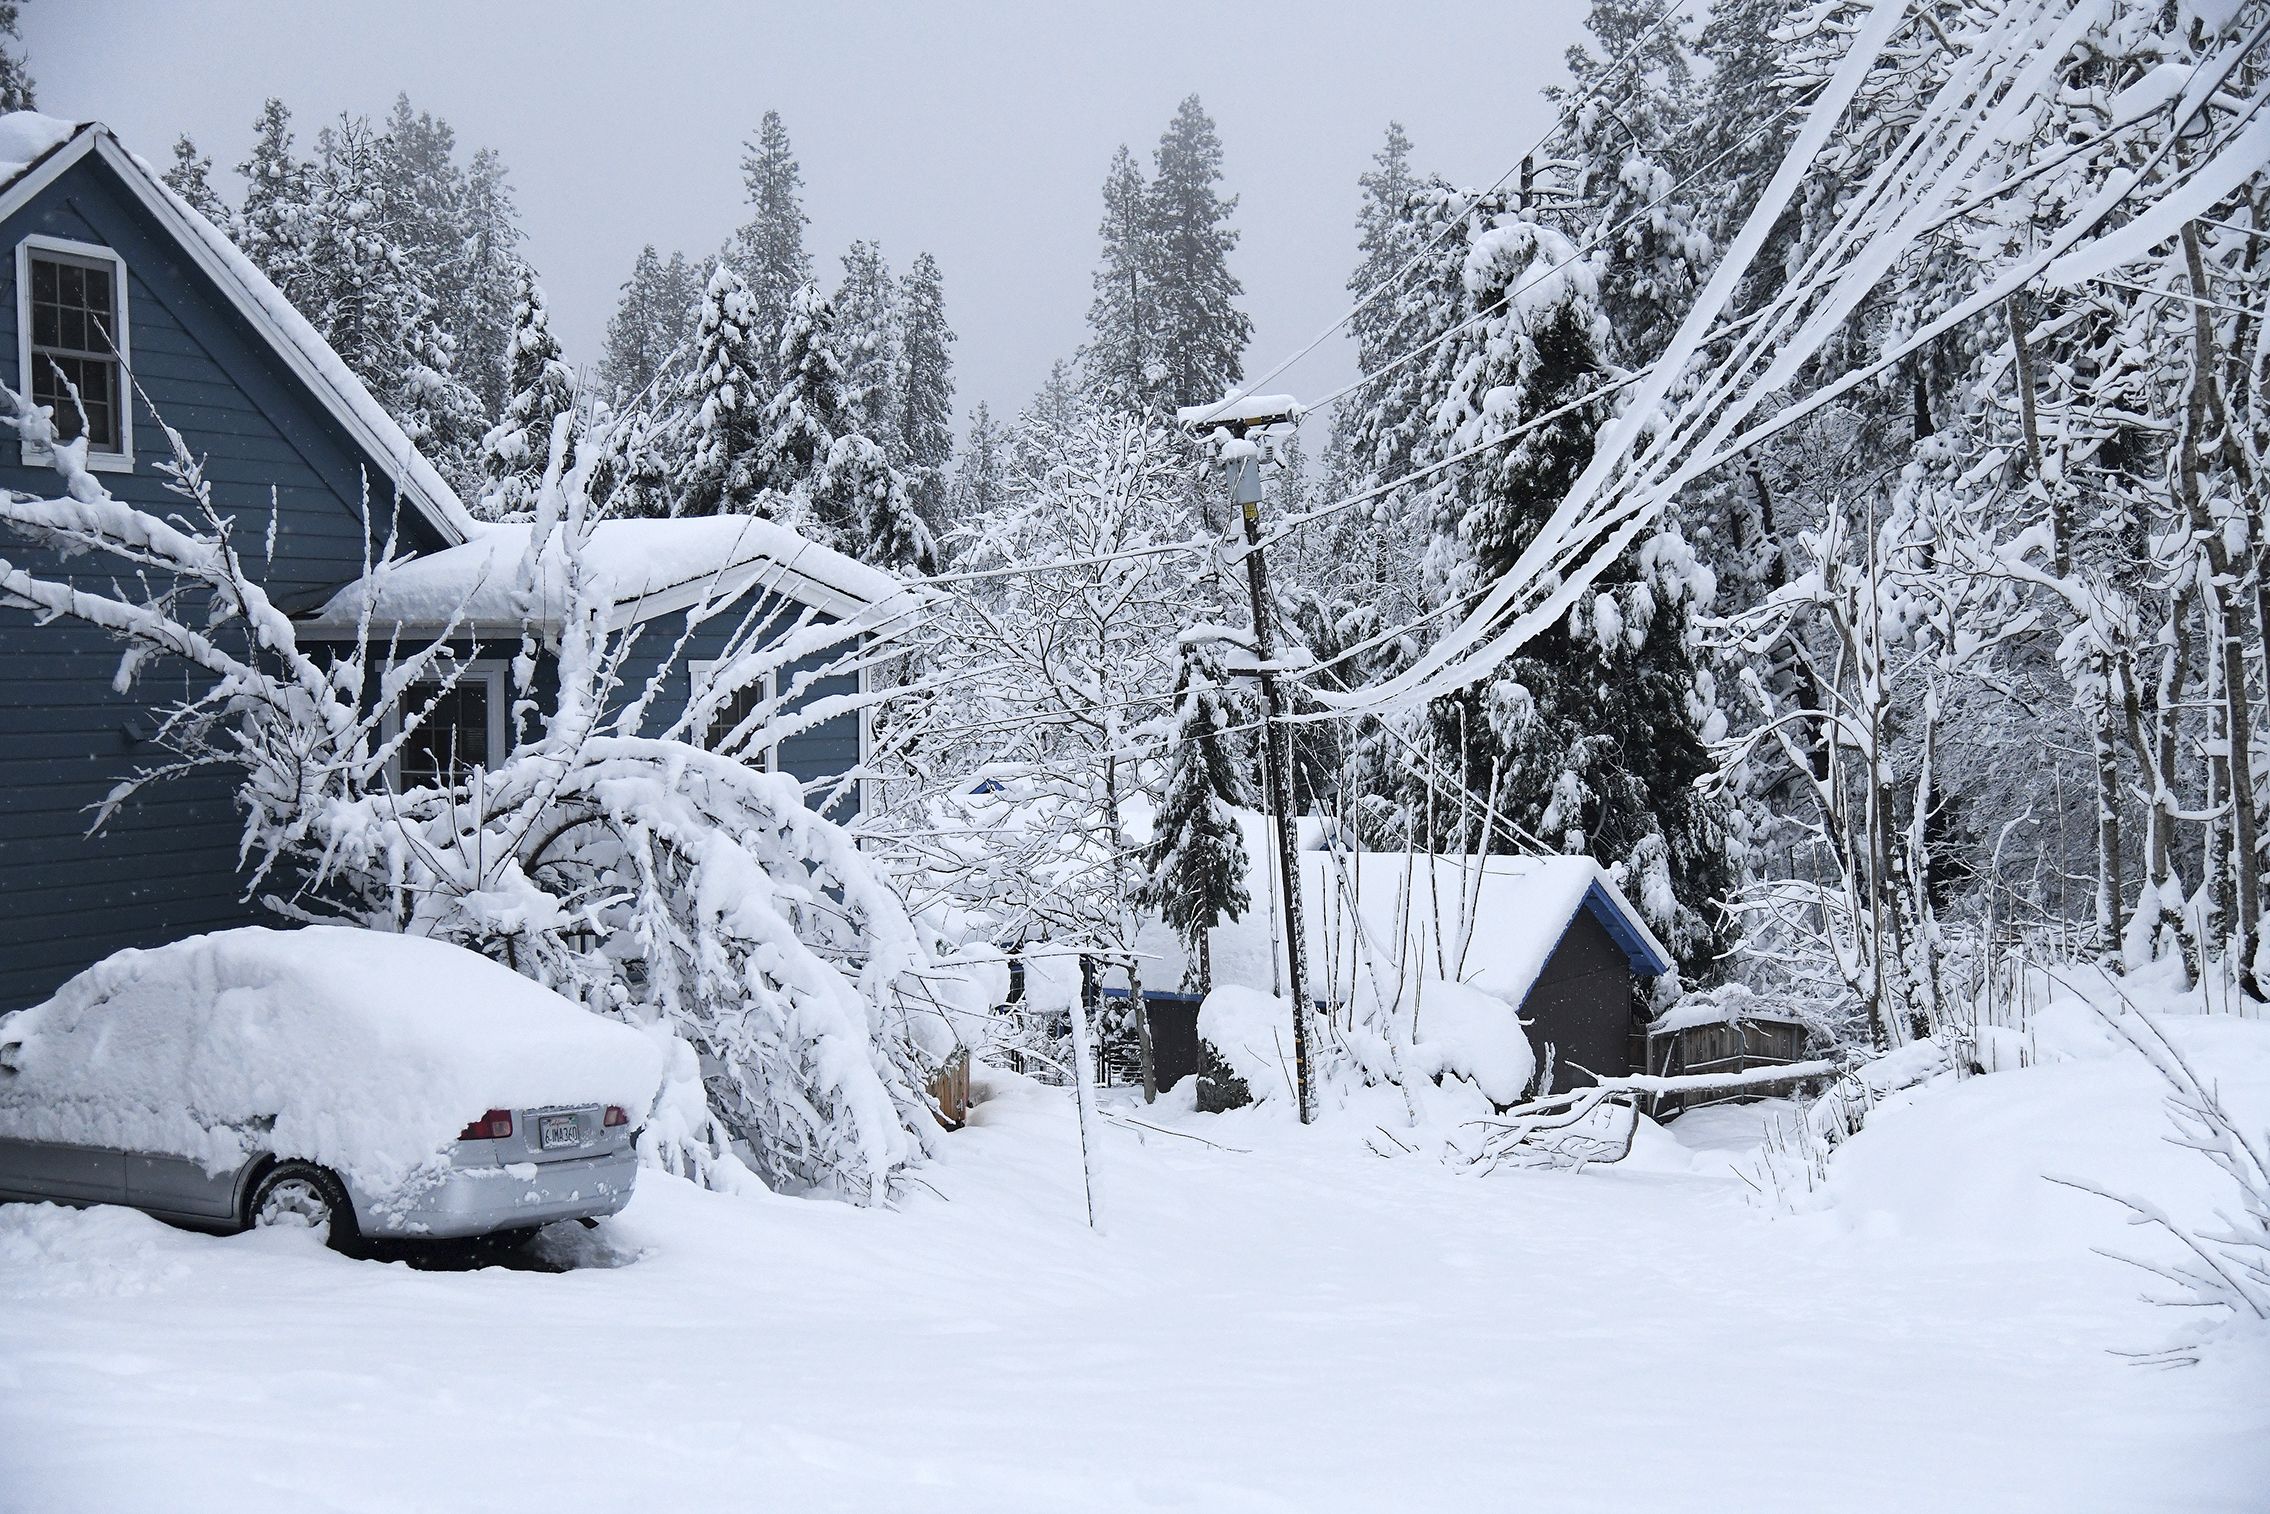 Winter in the Northwest: Surviving today and after the snow melts